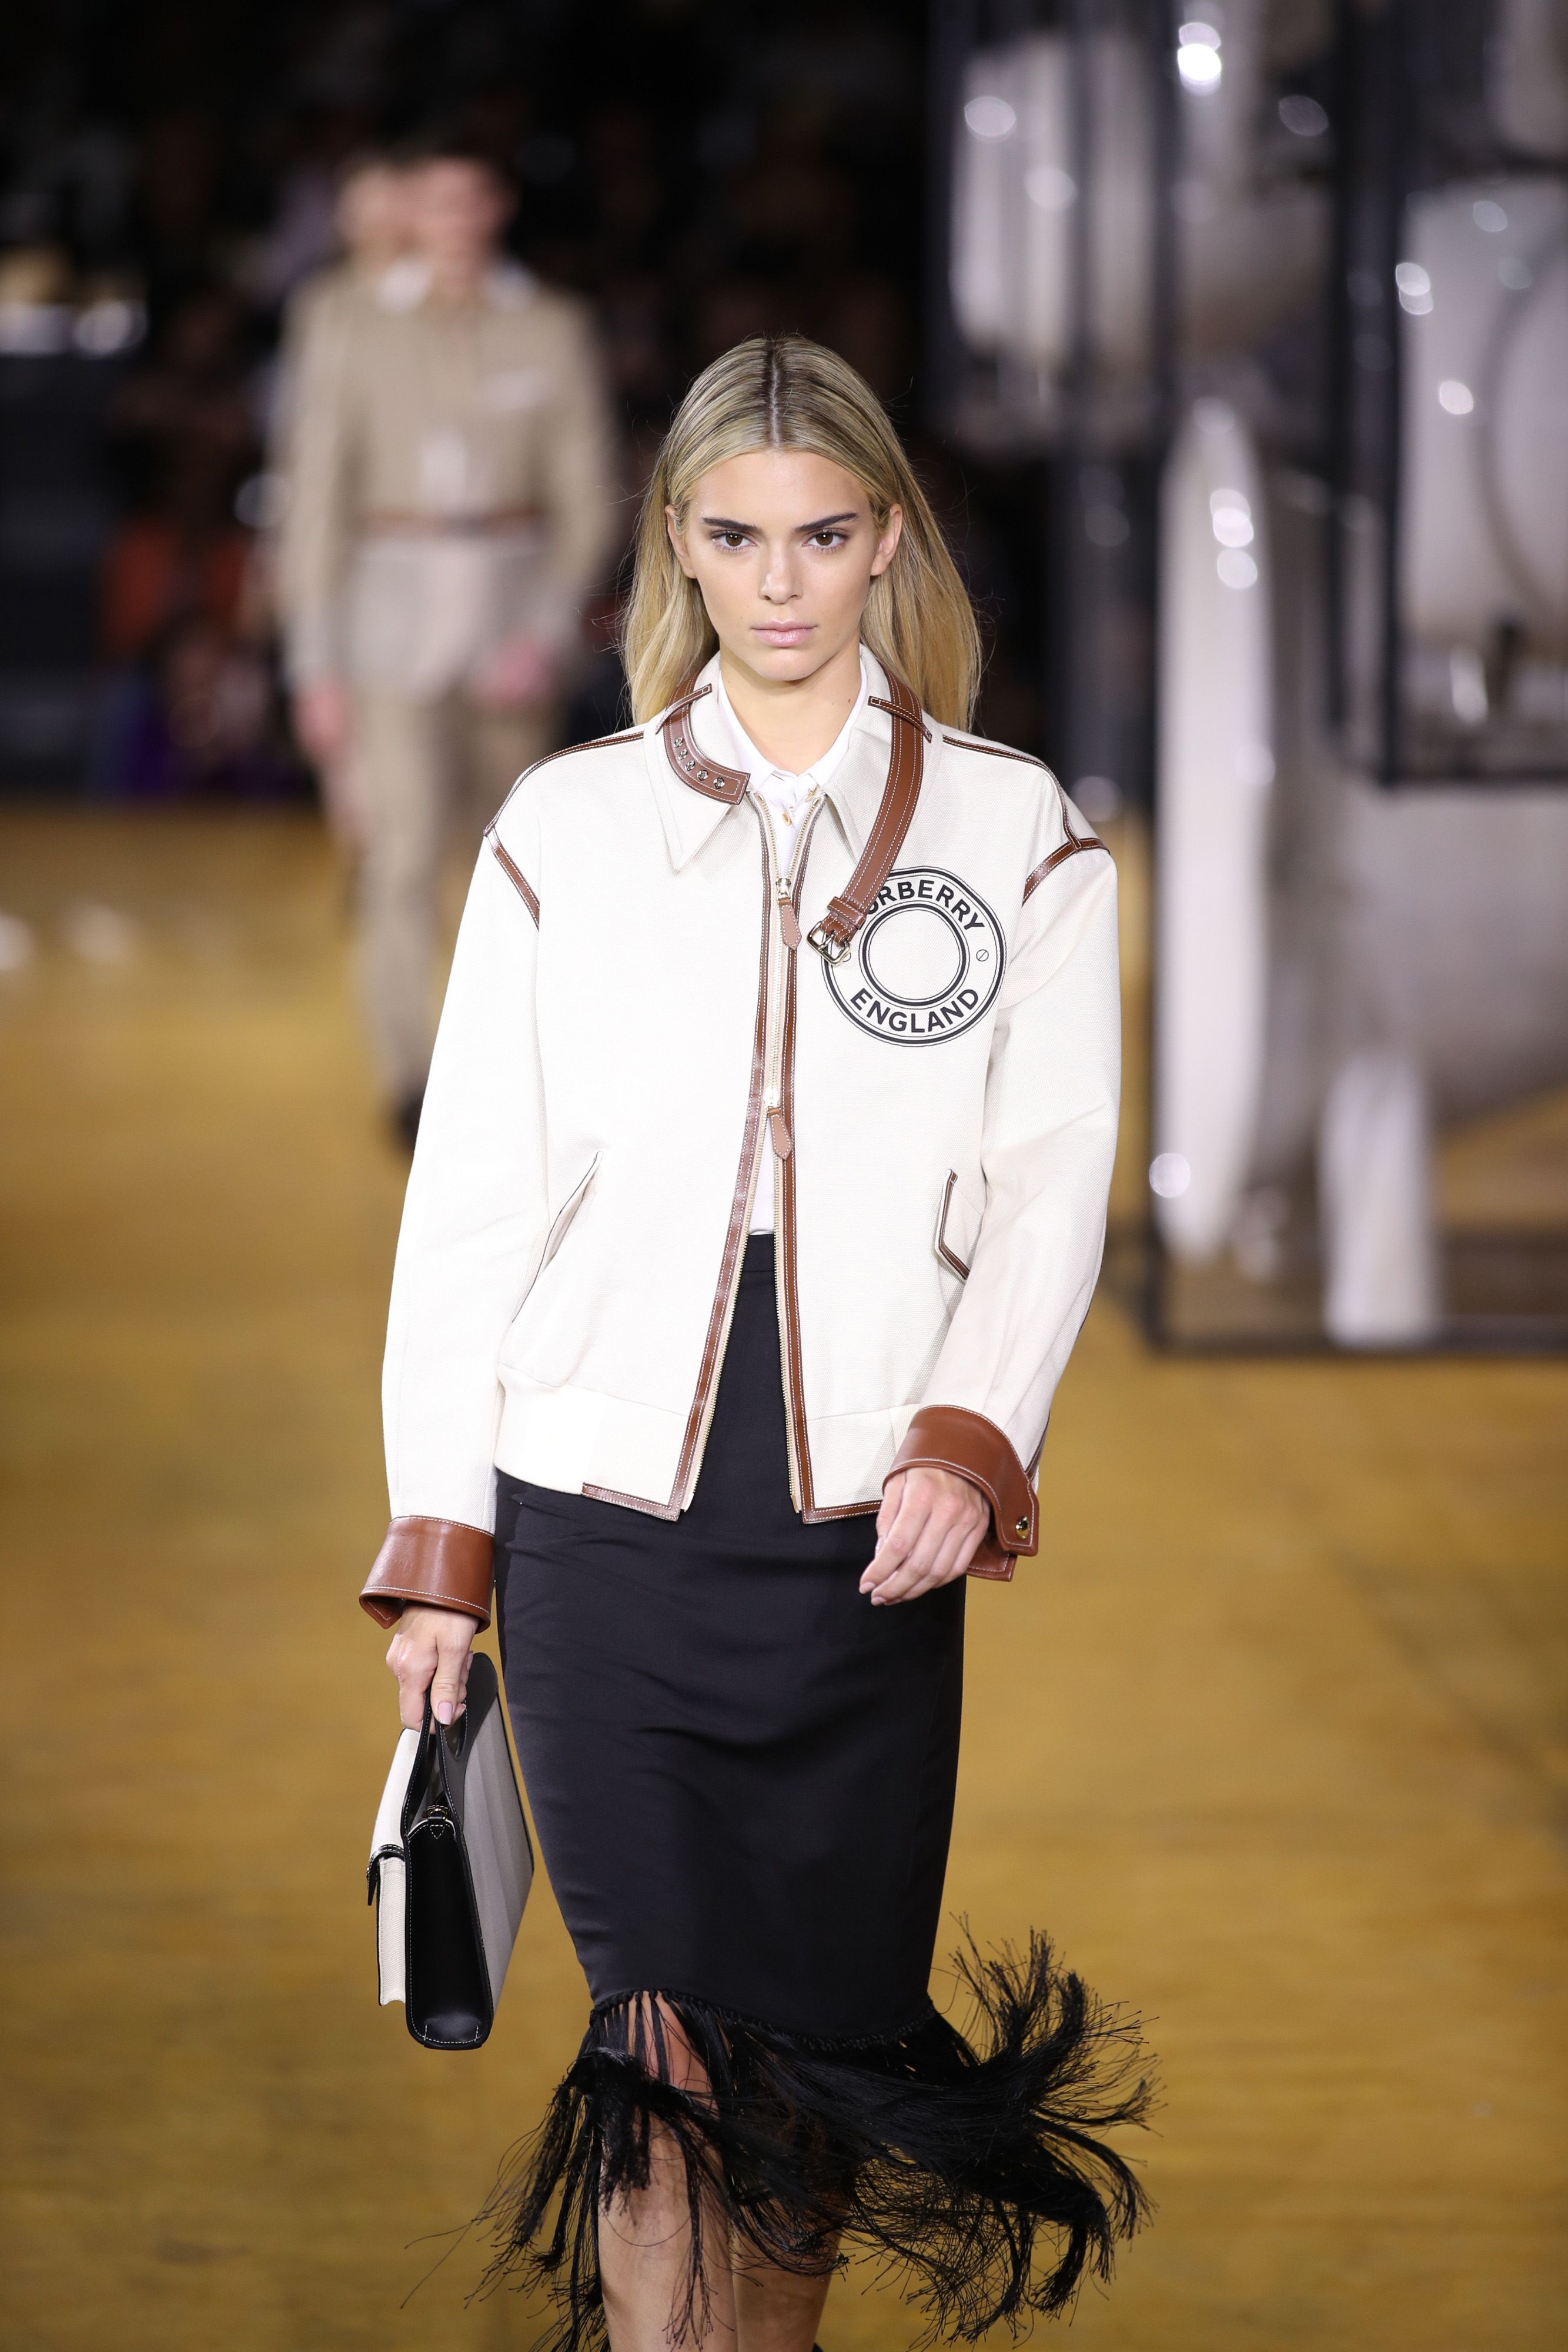 Kendall Jenner Makes A Surprise Appearance On The Burberry Catwalk